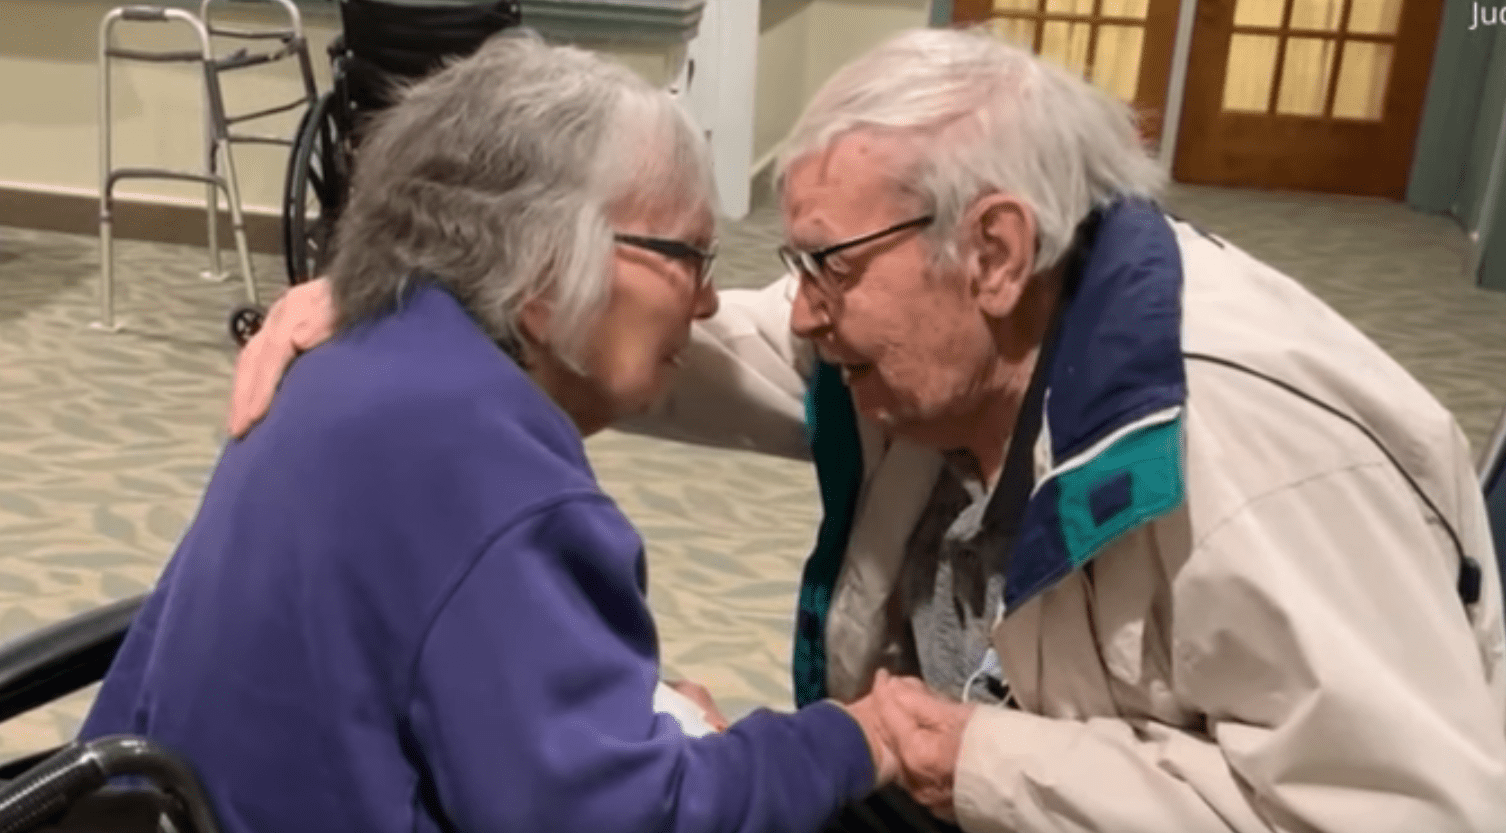 Jean and Walter Willard getting emotional after reuniting with each other. | Source: Youtube.com/CBS News